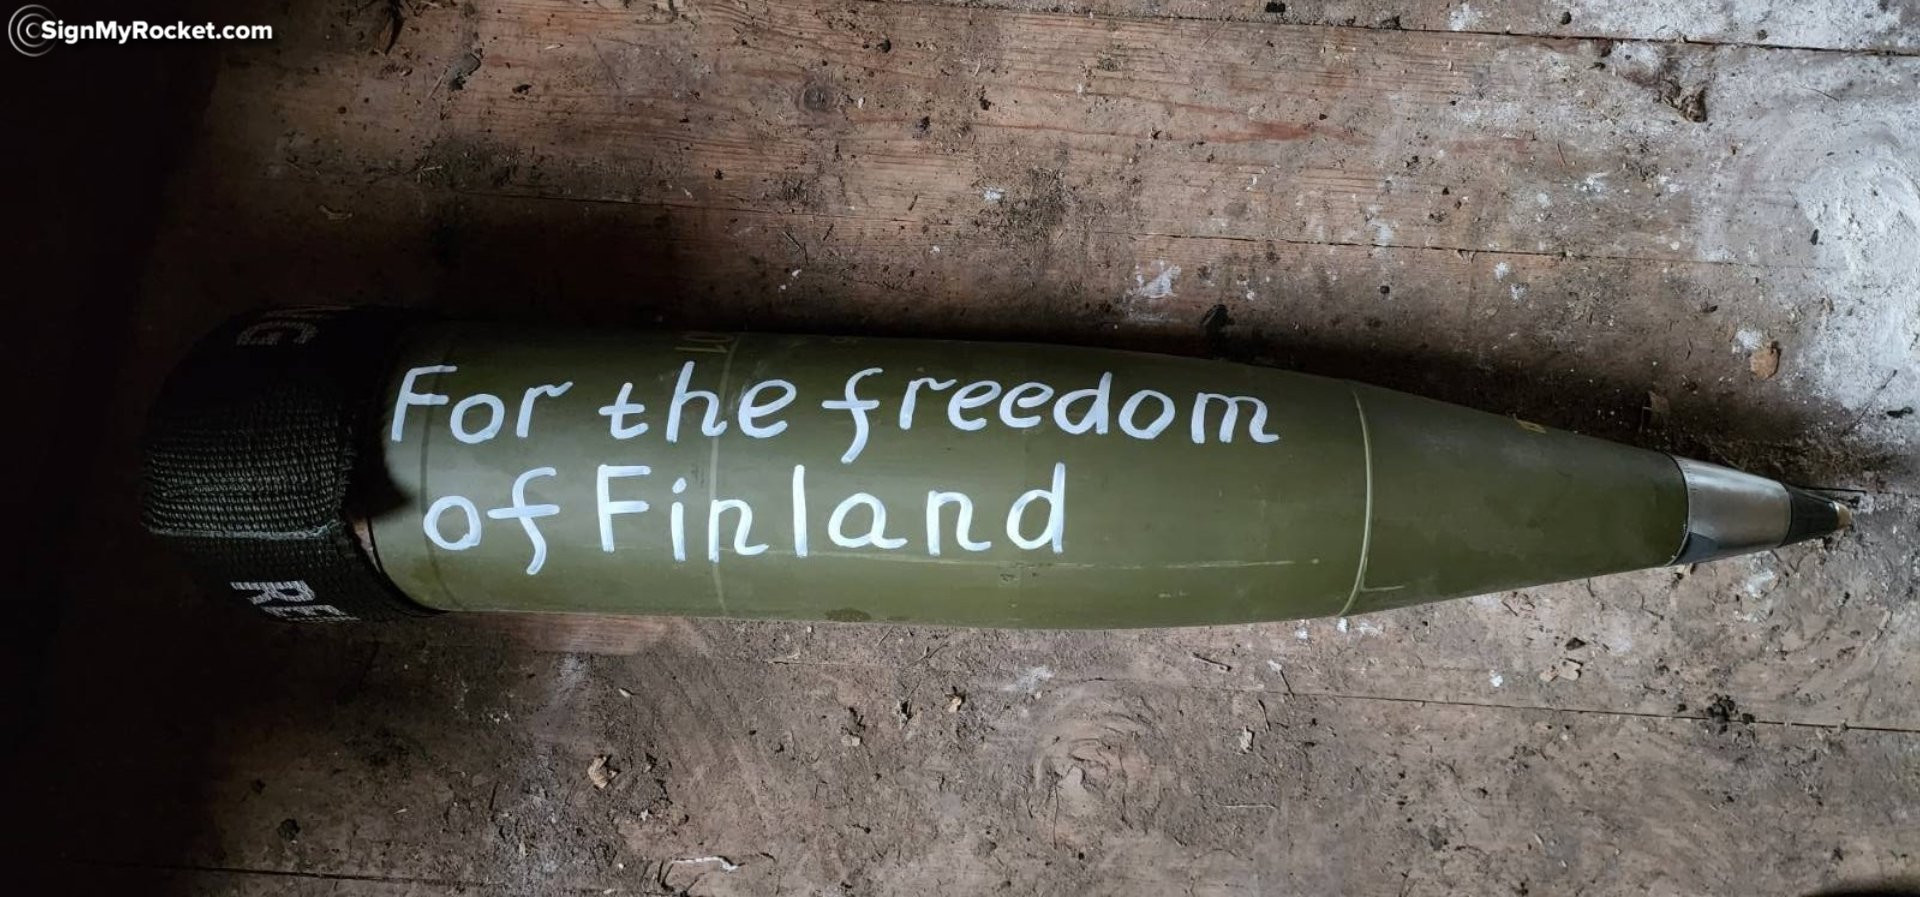 The Finnish MP’s decision to send a message to Russia with a Ukrainian rocket arouses heated debate